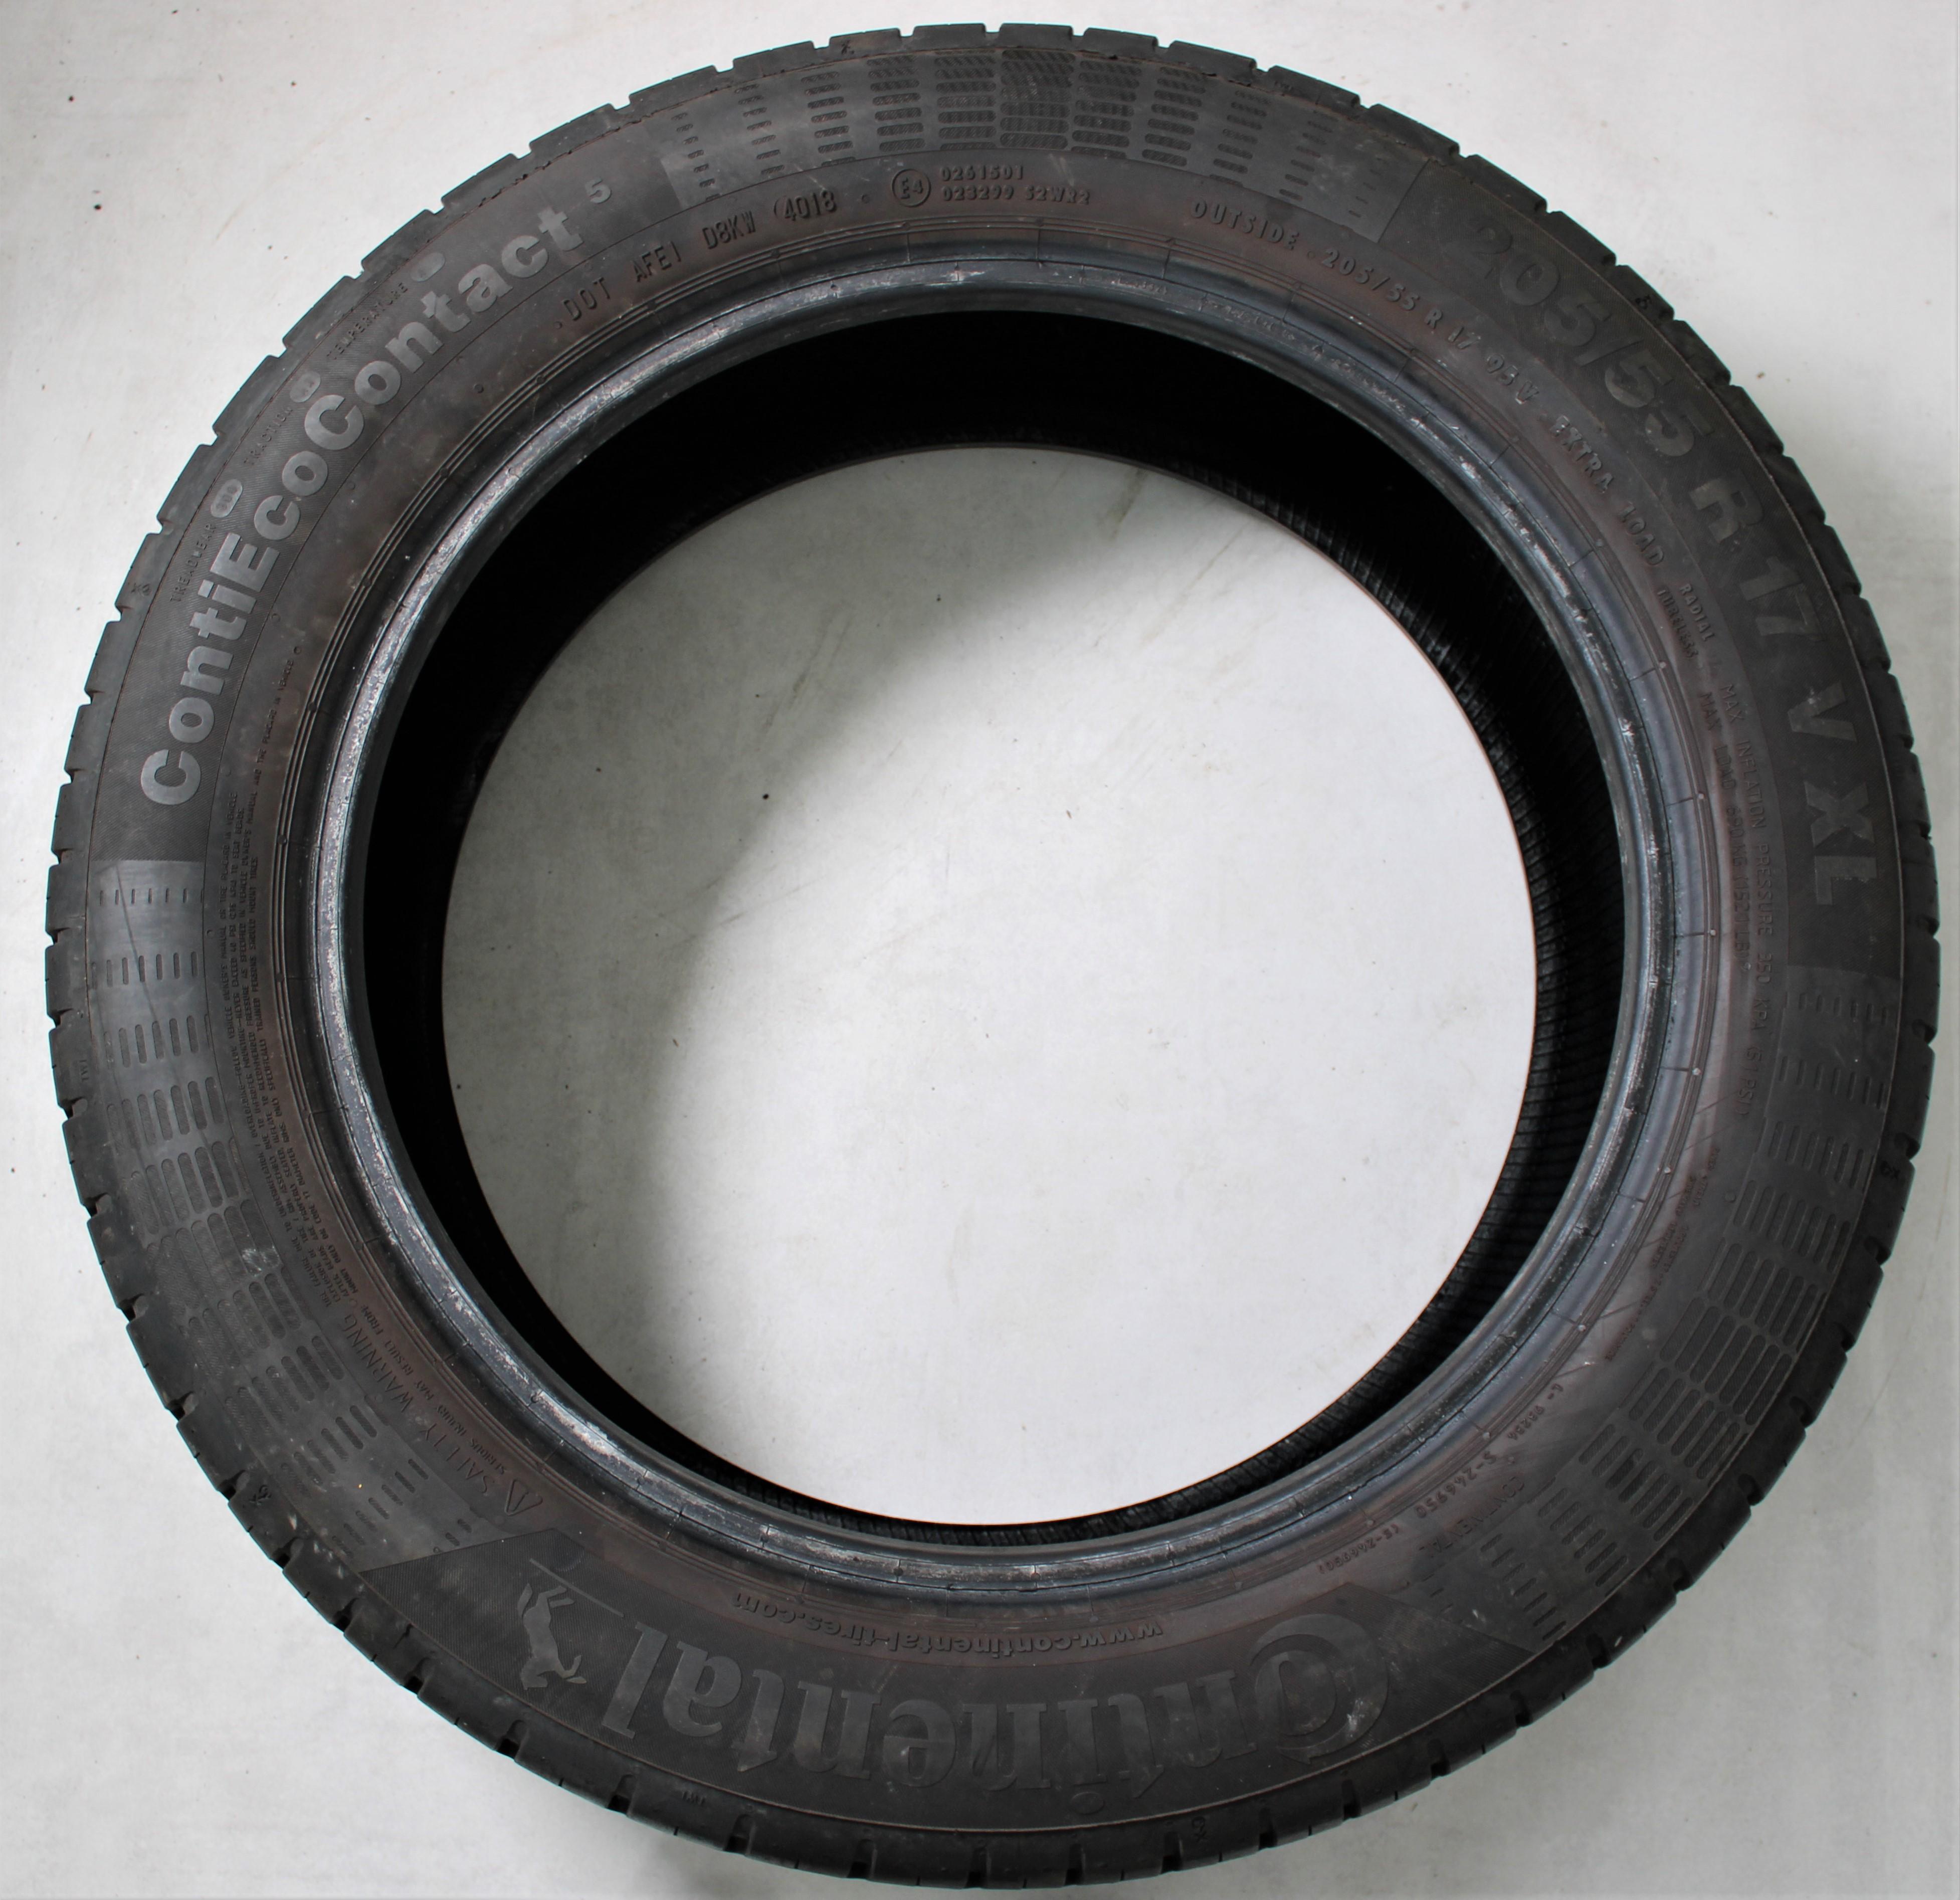 1 x 205/55R17 95V Sommerreifen Continental  Eco Contact 5 7mm 2018 XL